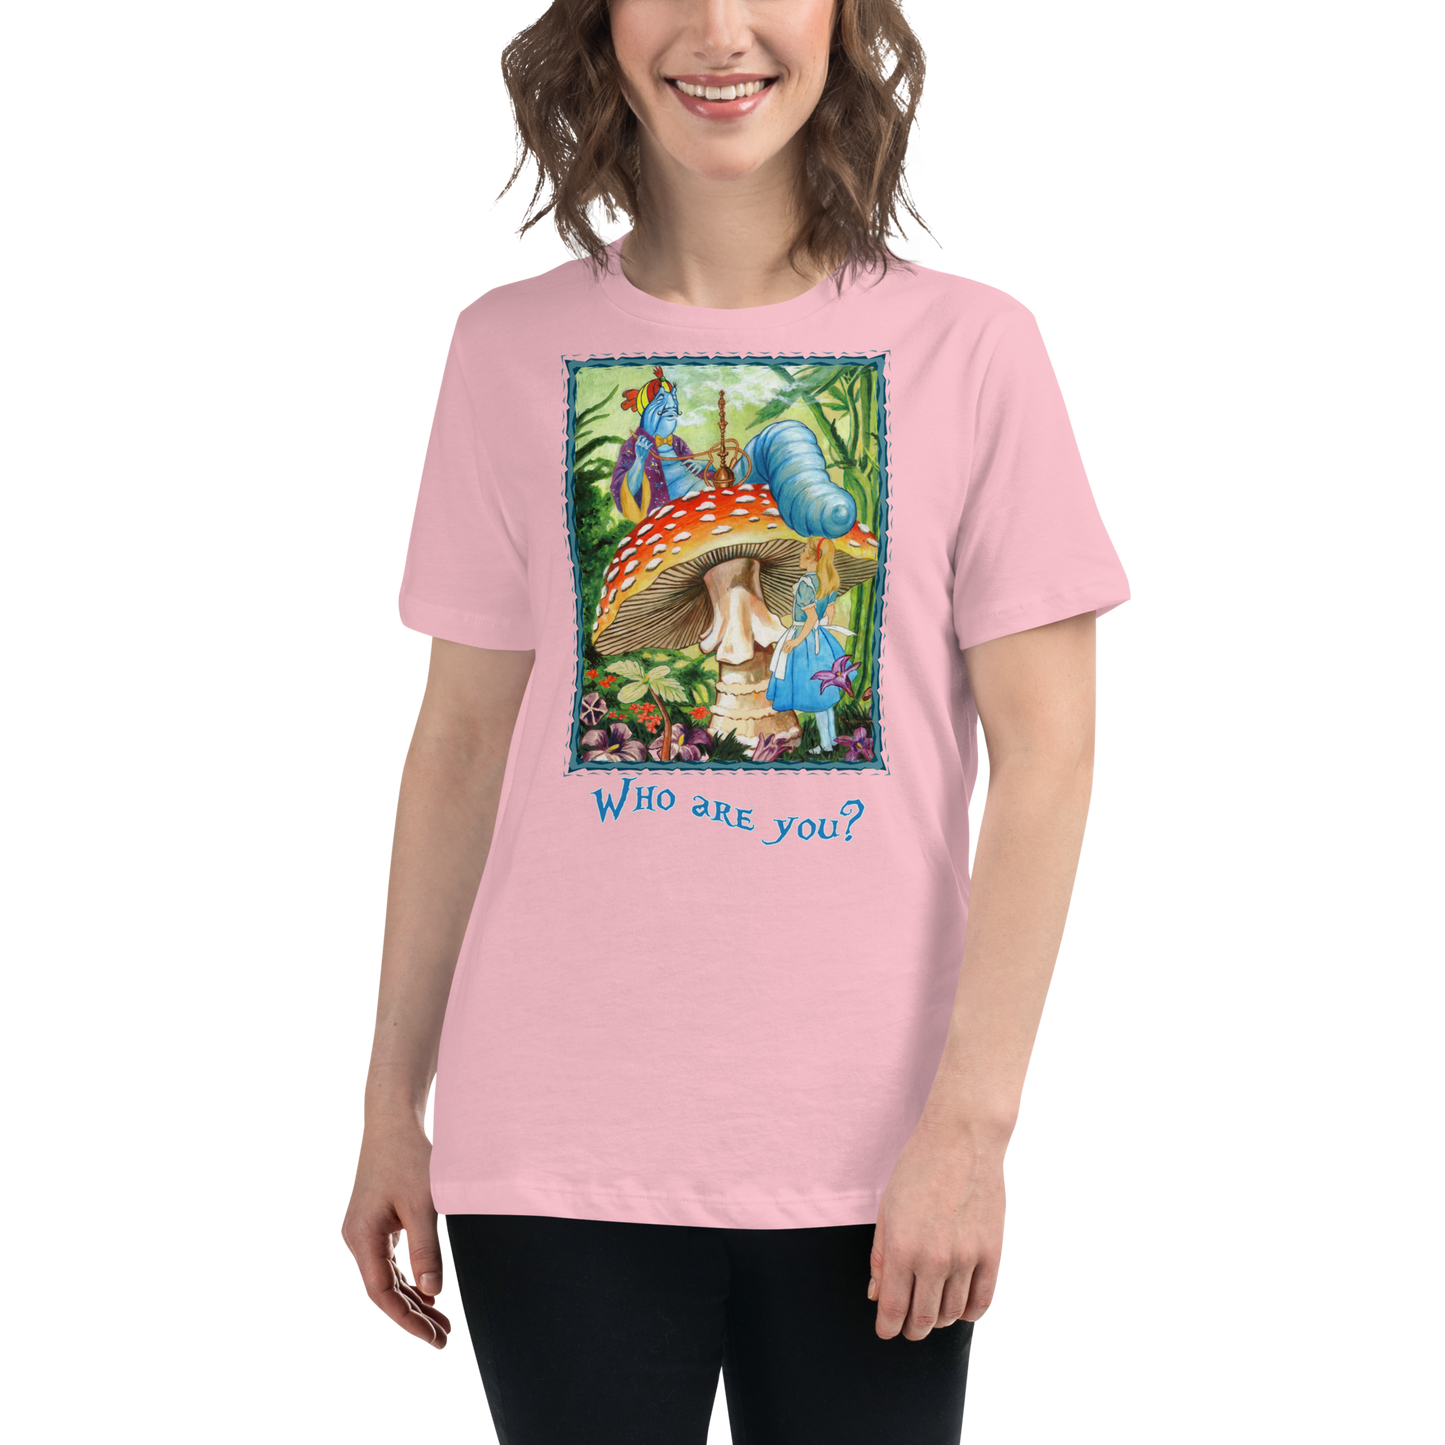 Alice & the Hookah-smoking Character - Women's Relaxed T-Shirt